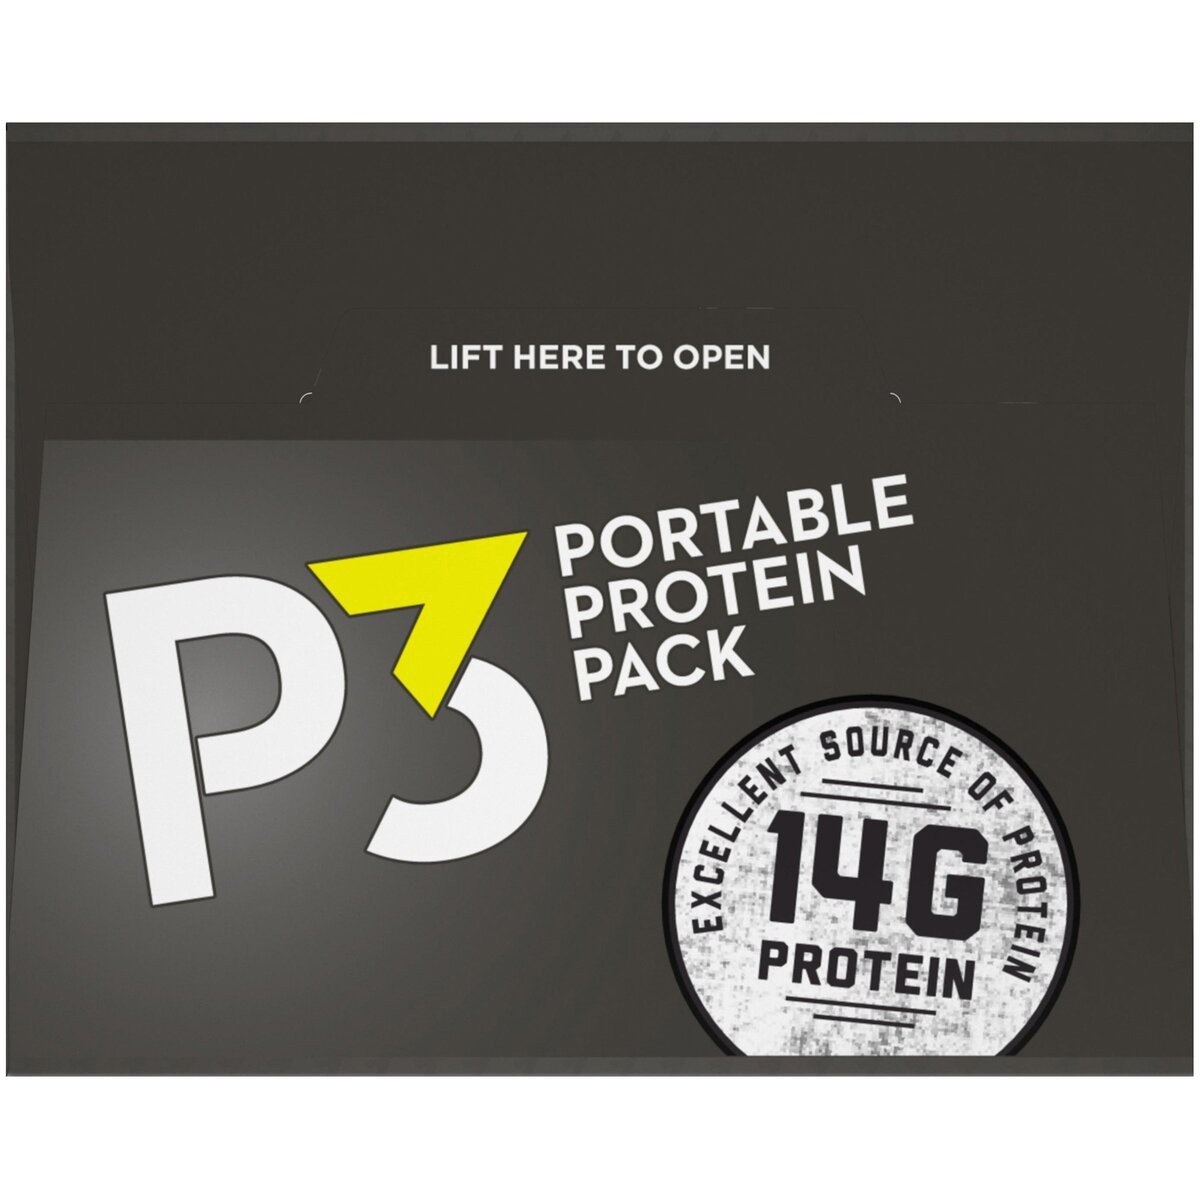 slide 5 of 8, P3 Portable Protein Snack Pack with Heat Peanuts, Sunflower Kernels & BBQ Seasoned Pork Jerky Trays, 5.4 oz